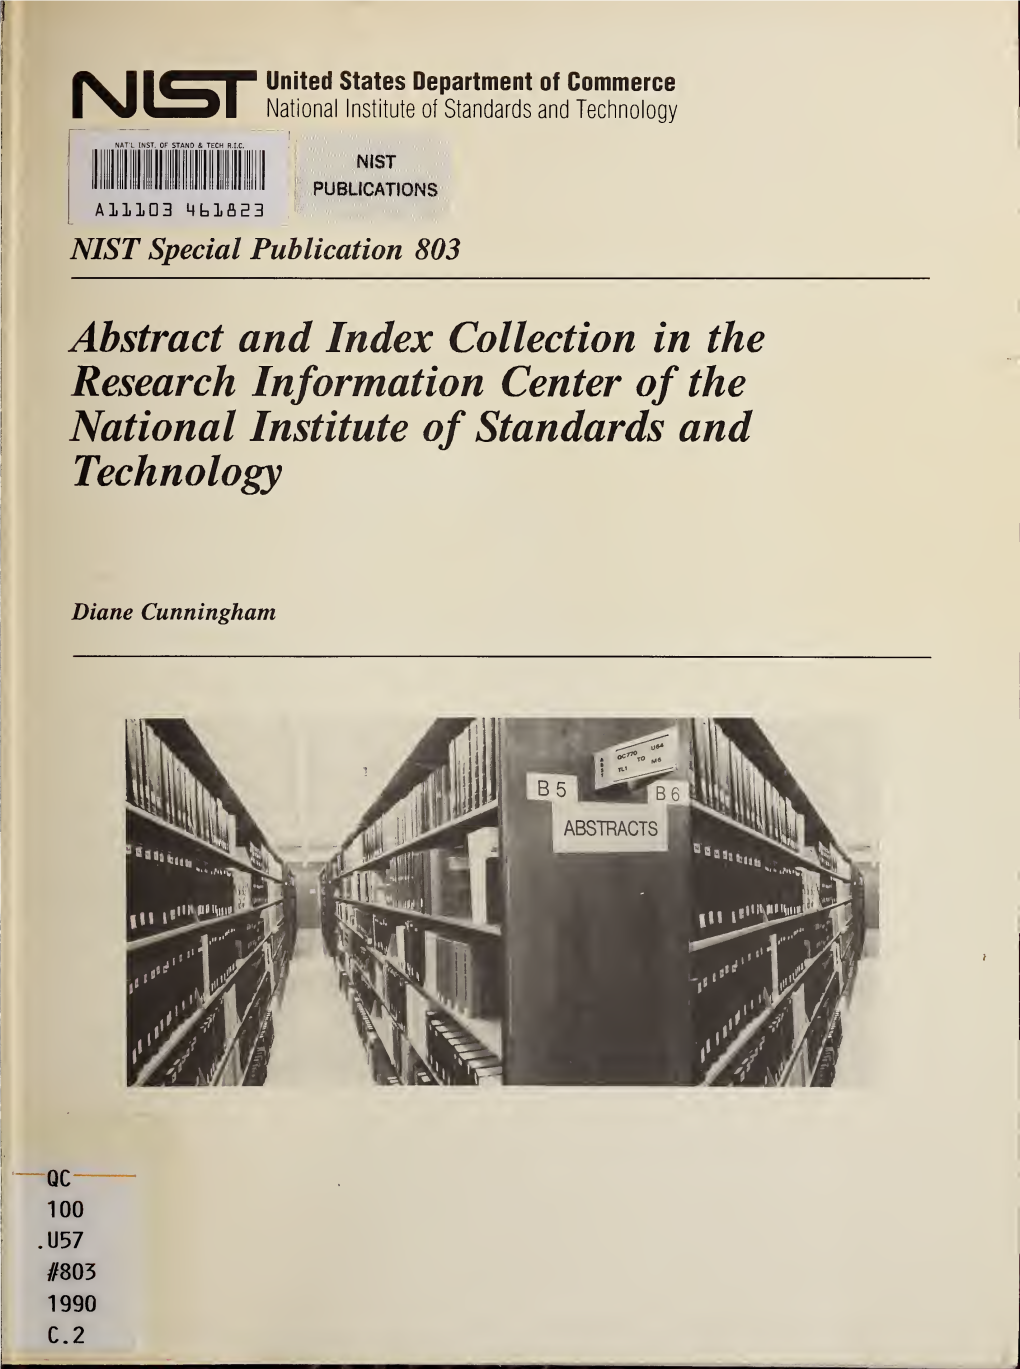 Abstract and Index Collection in the Research Information Center of the National Institute of Standards and Technology